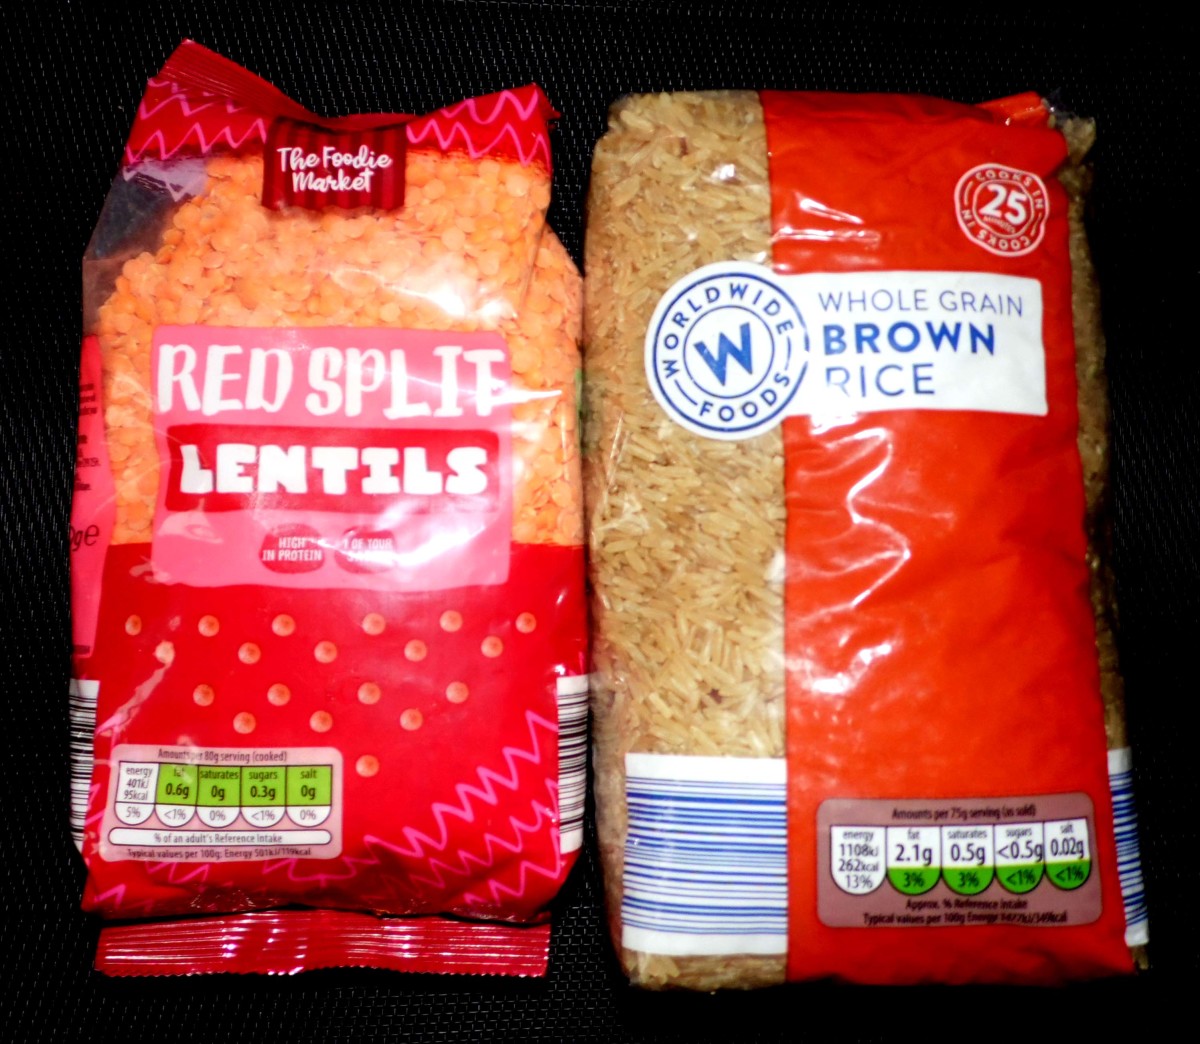 Red lentils and brown rice